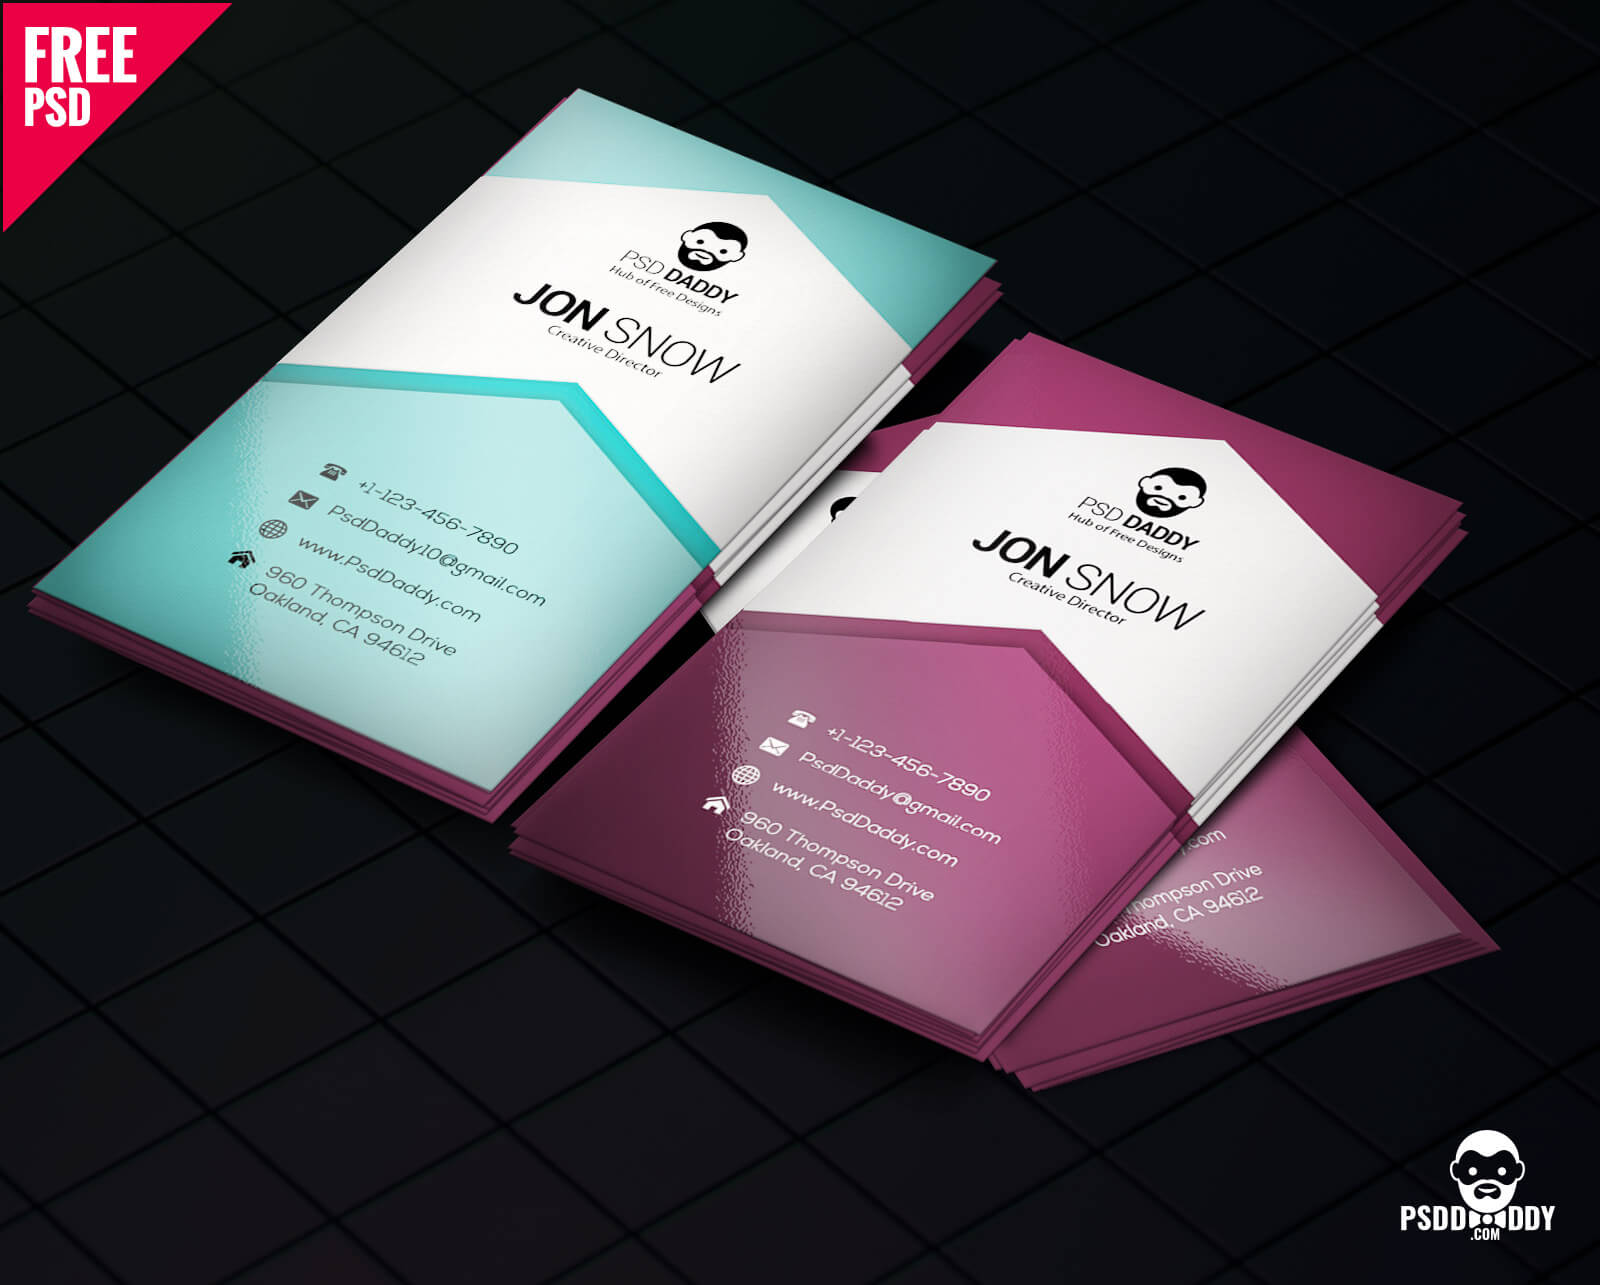 Download]Creative Business Card Psd Free | Psddaddy Throughout Business Card Maker Template